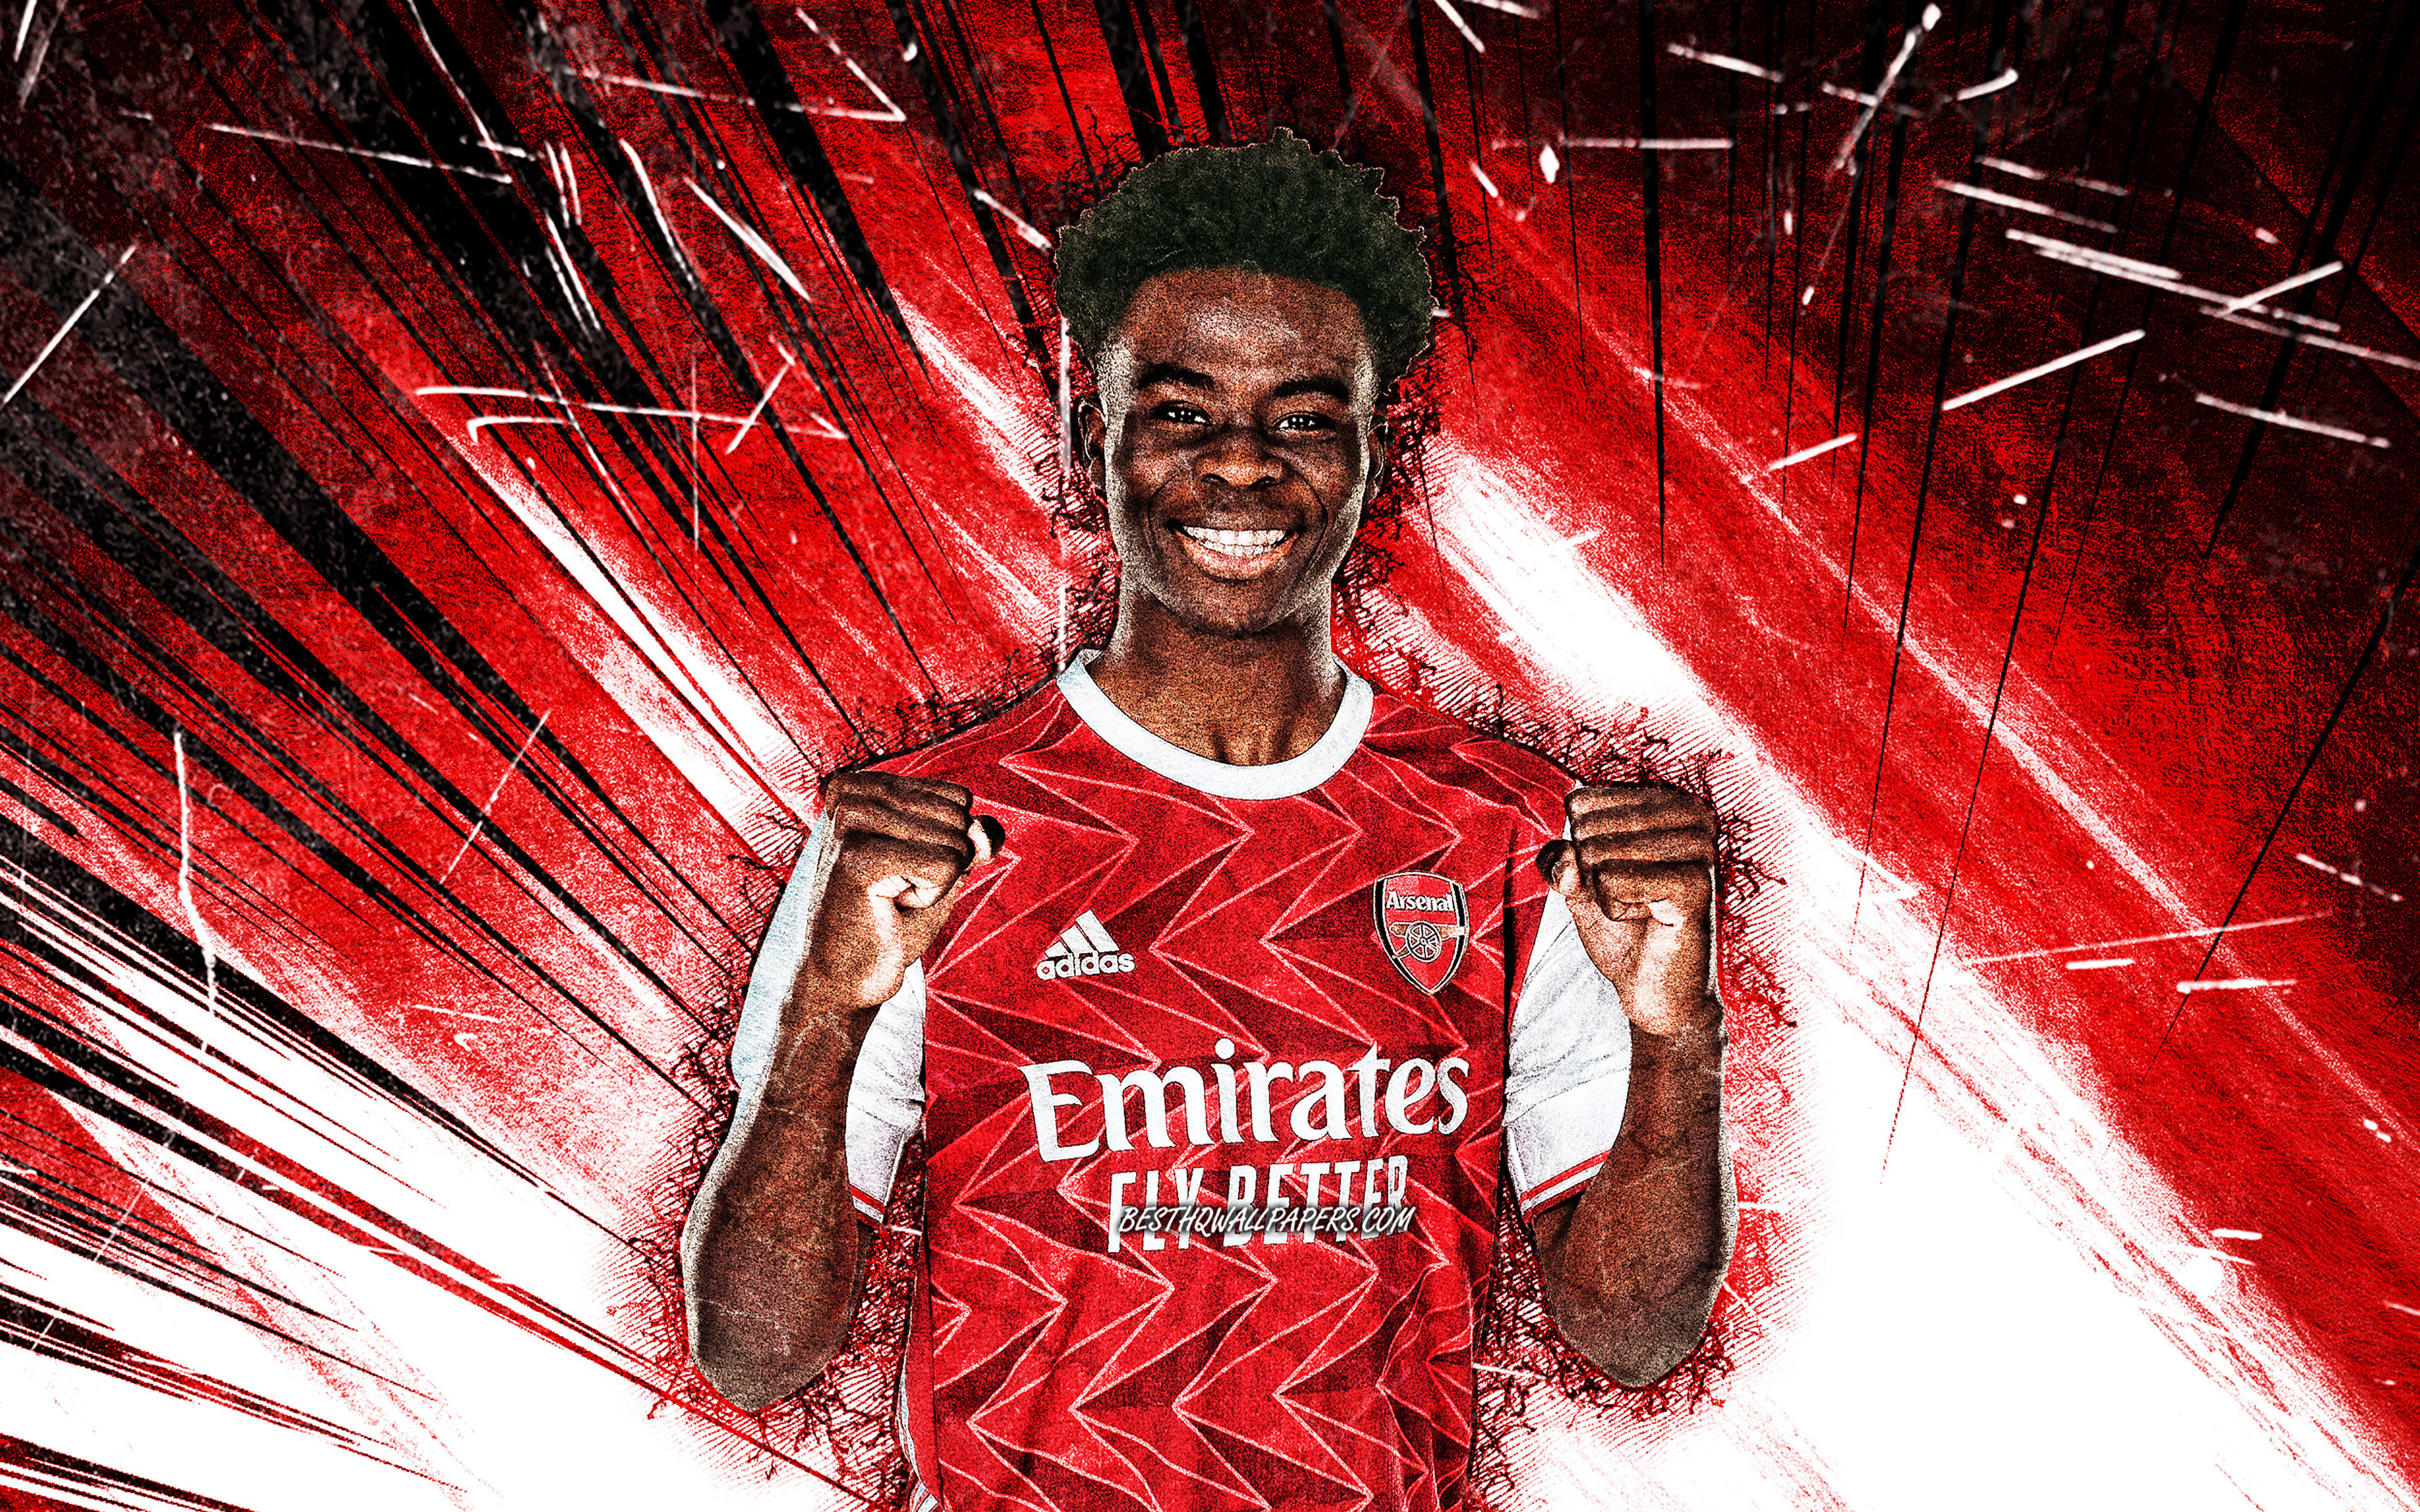 Download wallpaper 4k, Bukayo Saka, grunge art, English footballers, Arsenal FC, red abstract rays, soccer, Premier League, football, The Gunners, Bukayo Saka Arsenal for desktop with resolution 3840x2400. High Quality HD picture